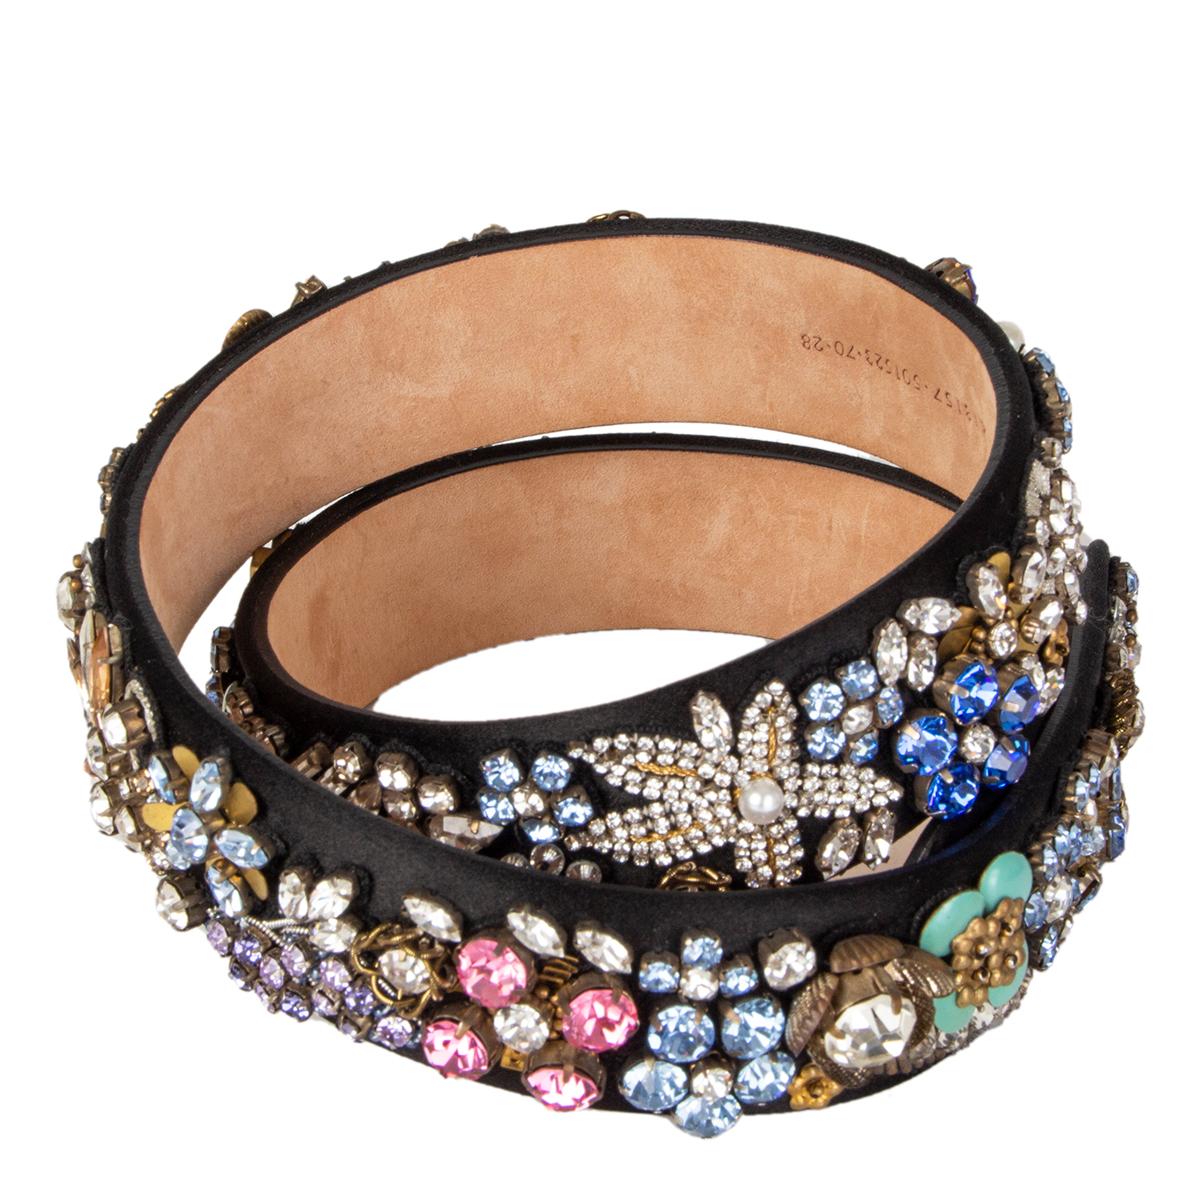 Alexander McQueen waist belt in black satin embellished with light-blue, bright-pink and clear crystals, faux pearls and burnished gold beads arranged in the shape of flowers. Backed in smooth leather and has adjustable snap fastenings at the front.